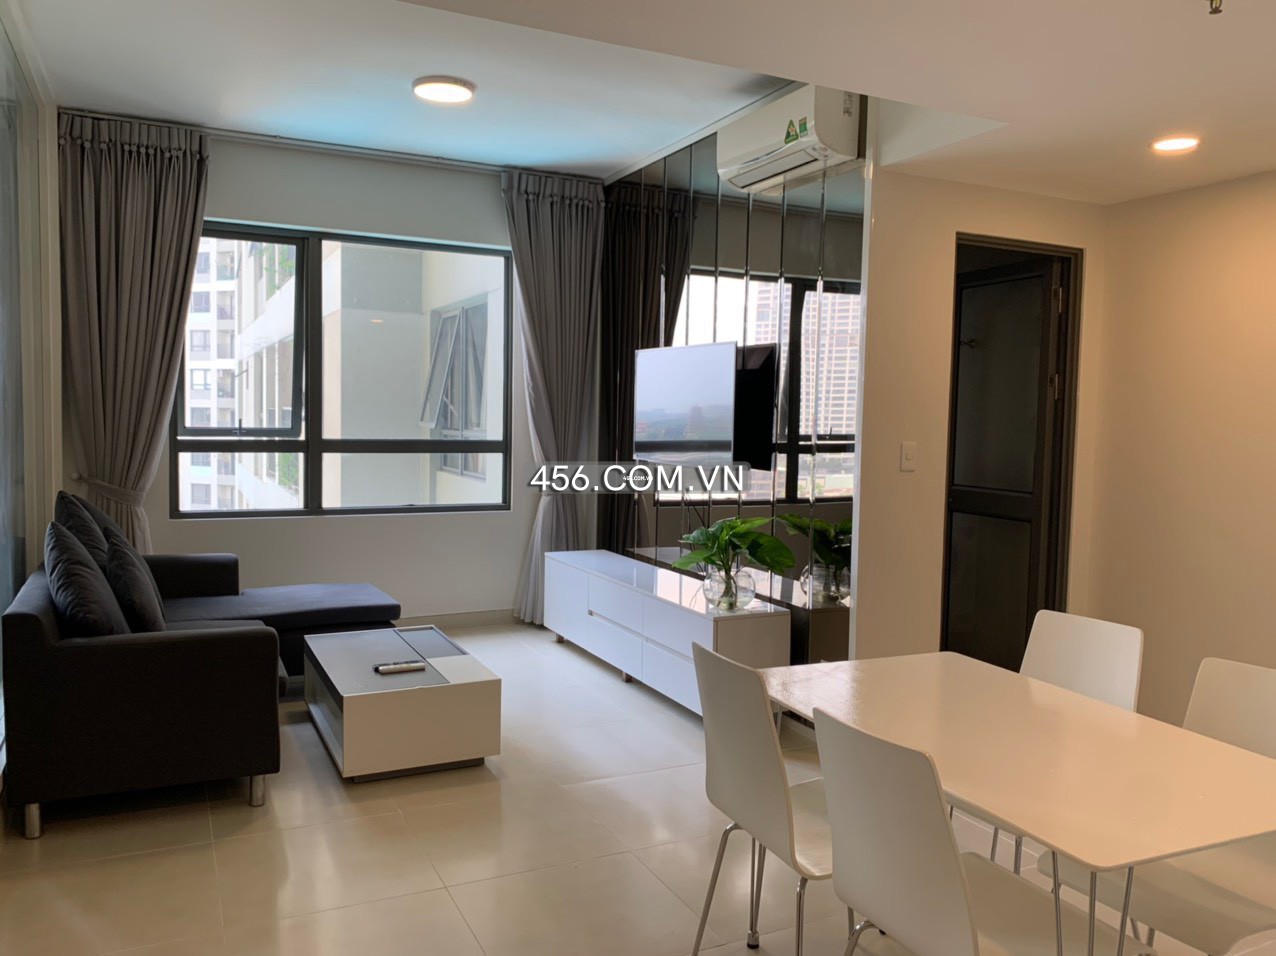 Hinh-1 Bedrooms Masteri Thao Dien Apartment For Lease Nice Furniture